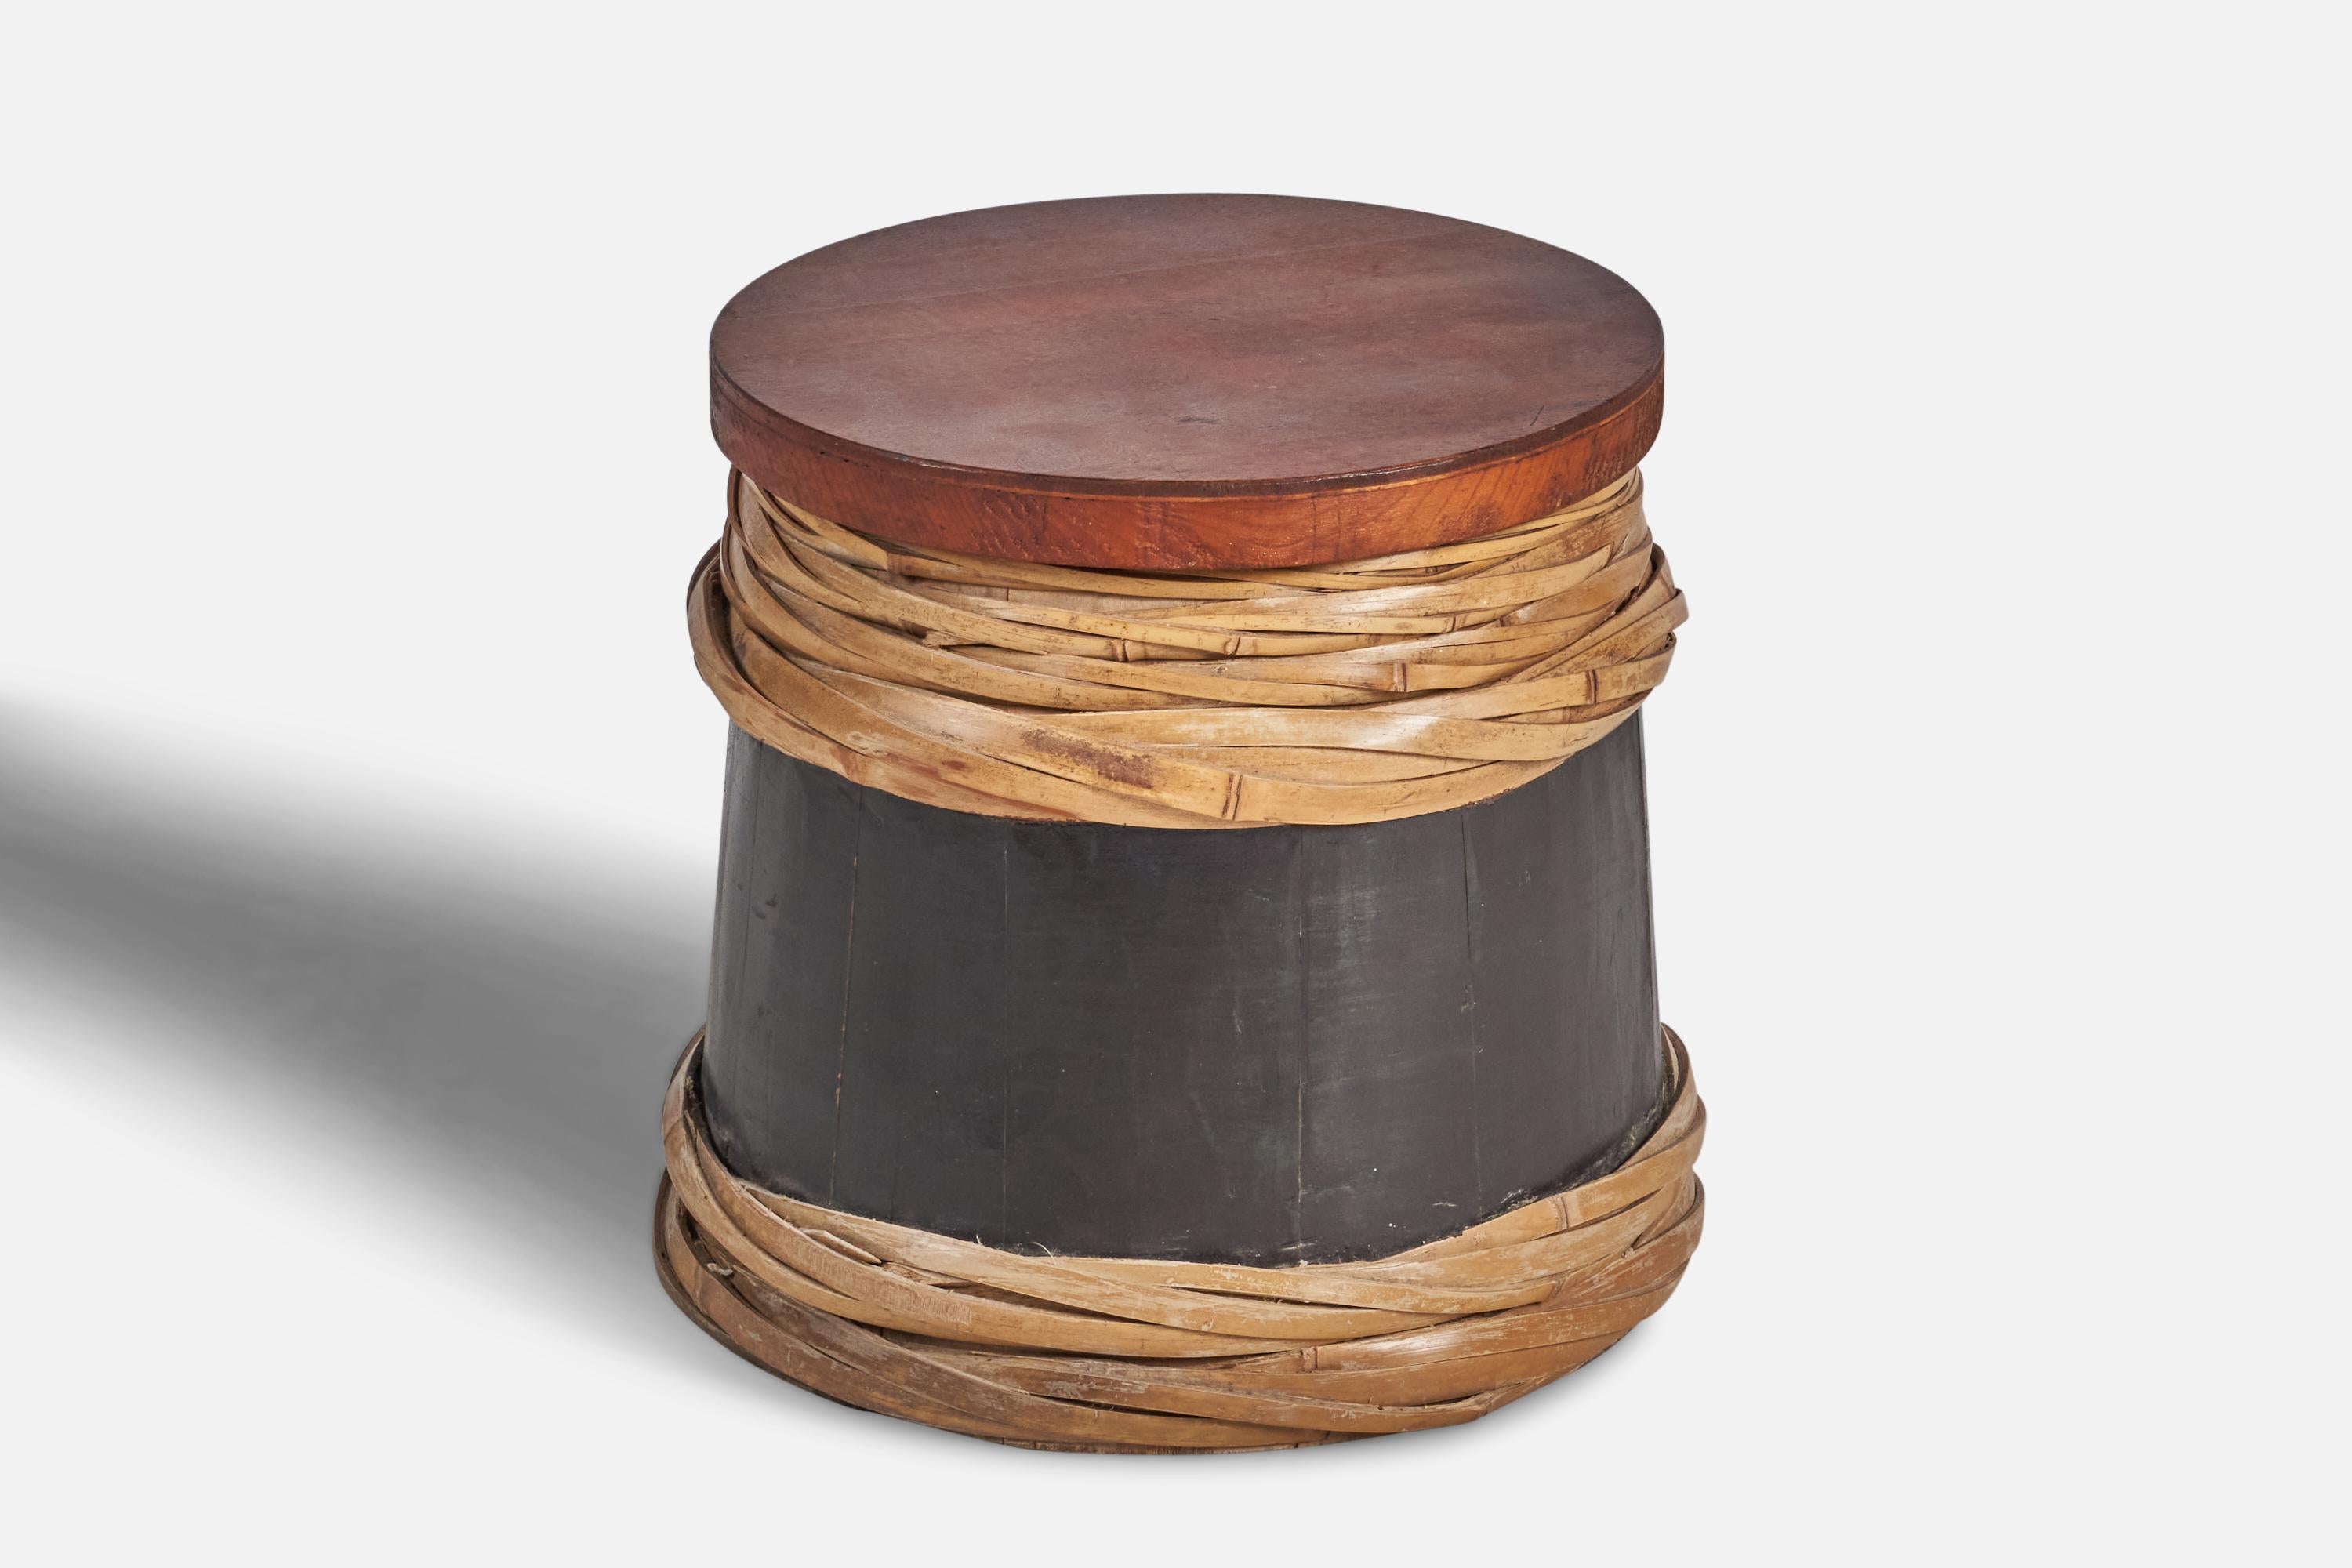 A teak, black-painted wood and rattan stool designed by an American architect and custom-produced in the Philippines, 1950s.